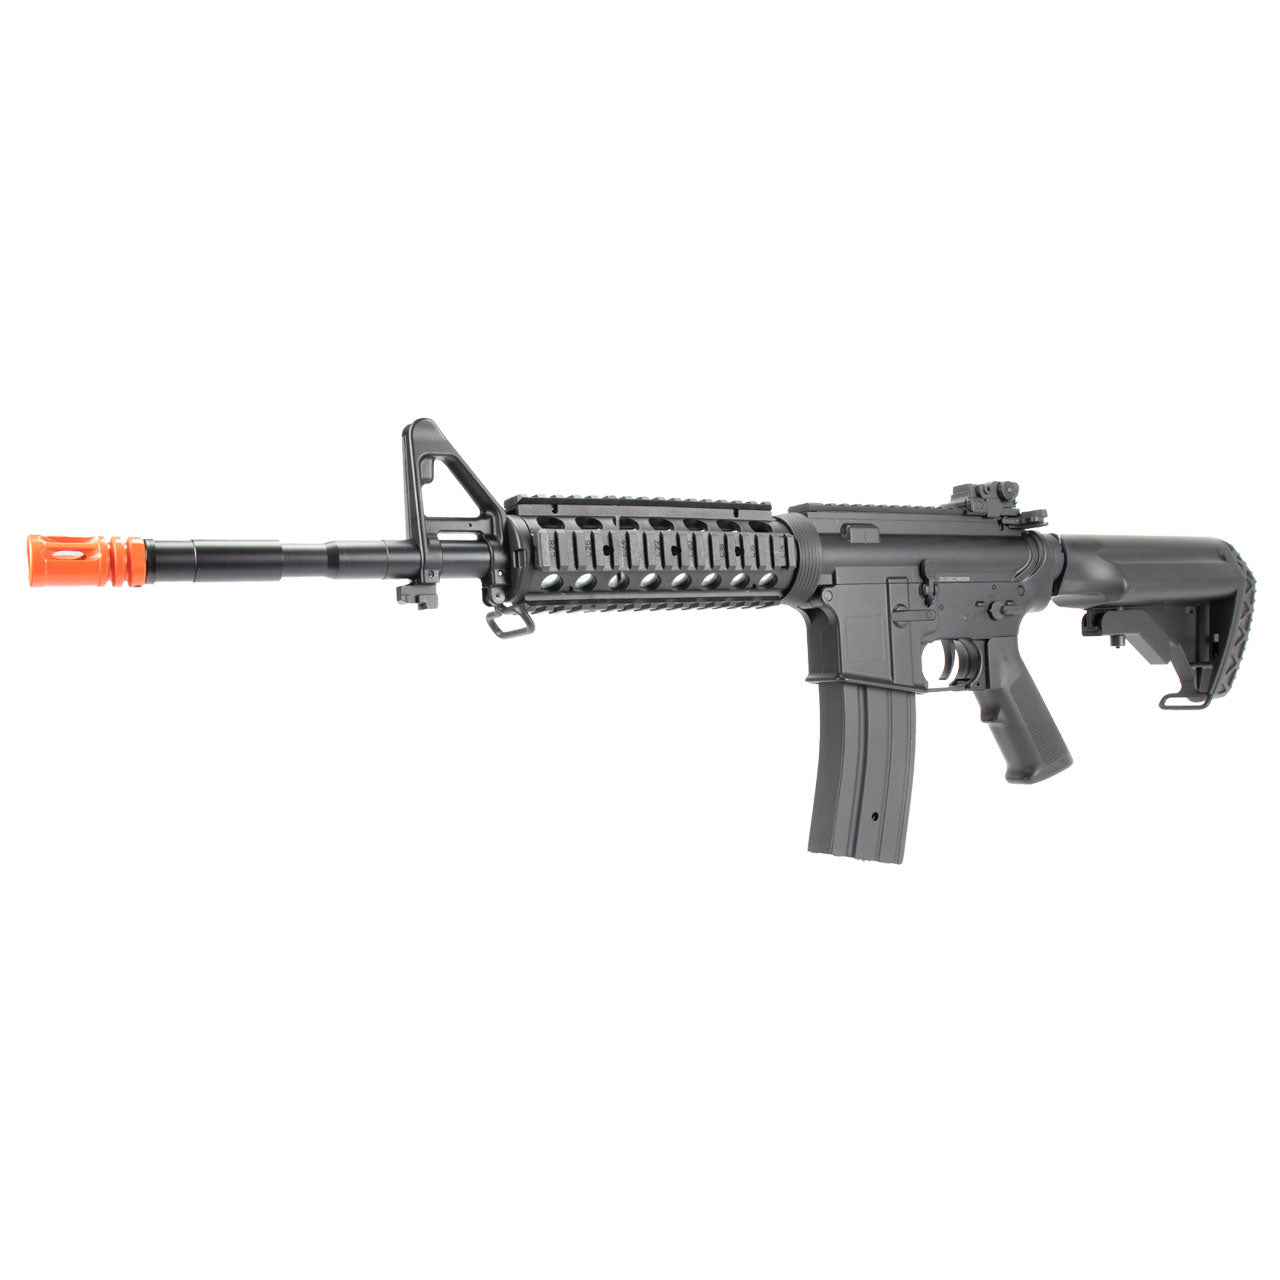 GE / JG M4 SOPMOD RIS Airsoft AEG Rifle with Rail Covers w/ Battery and Charger